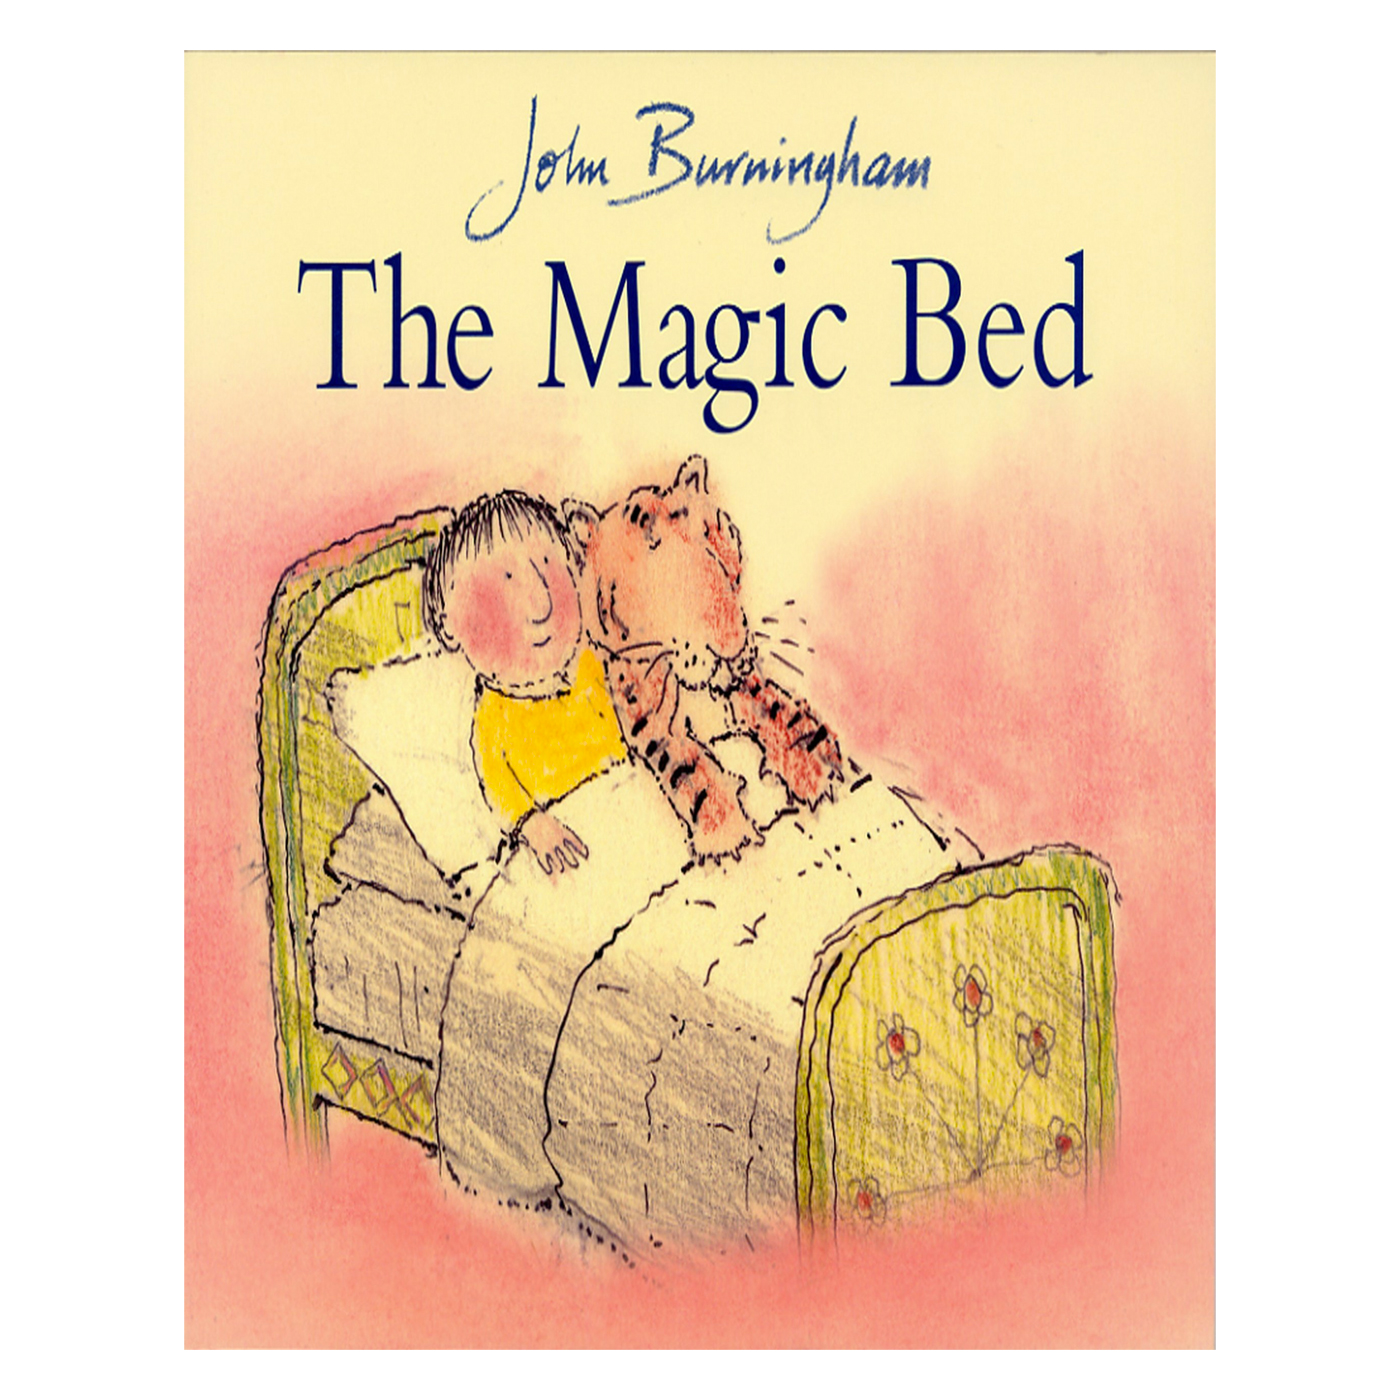  The Magic Bed